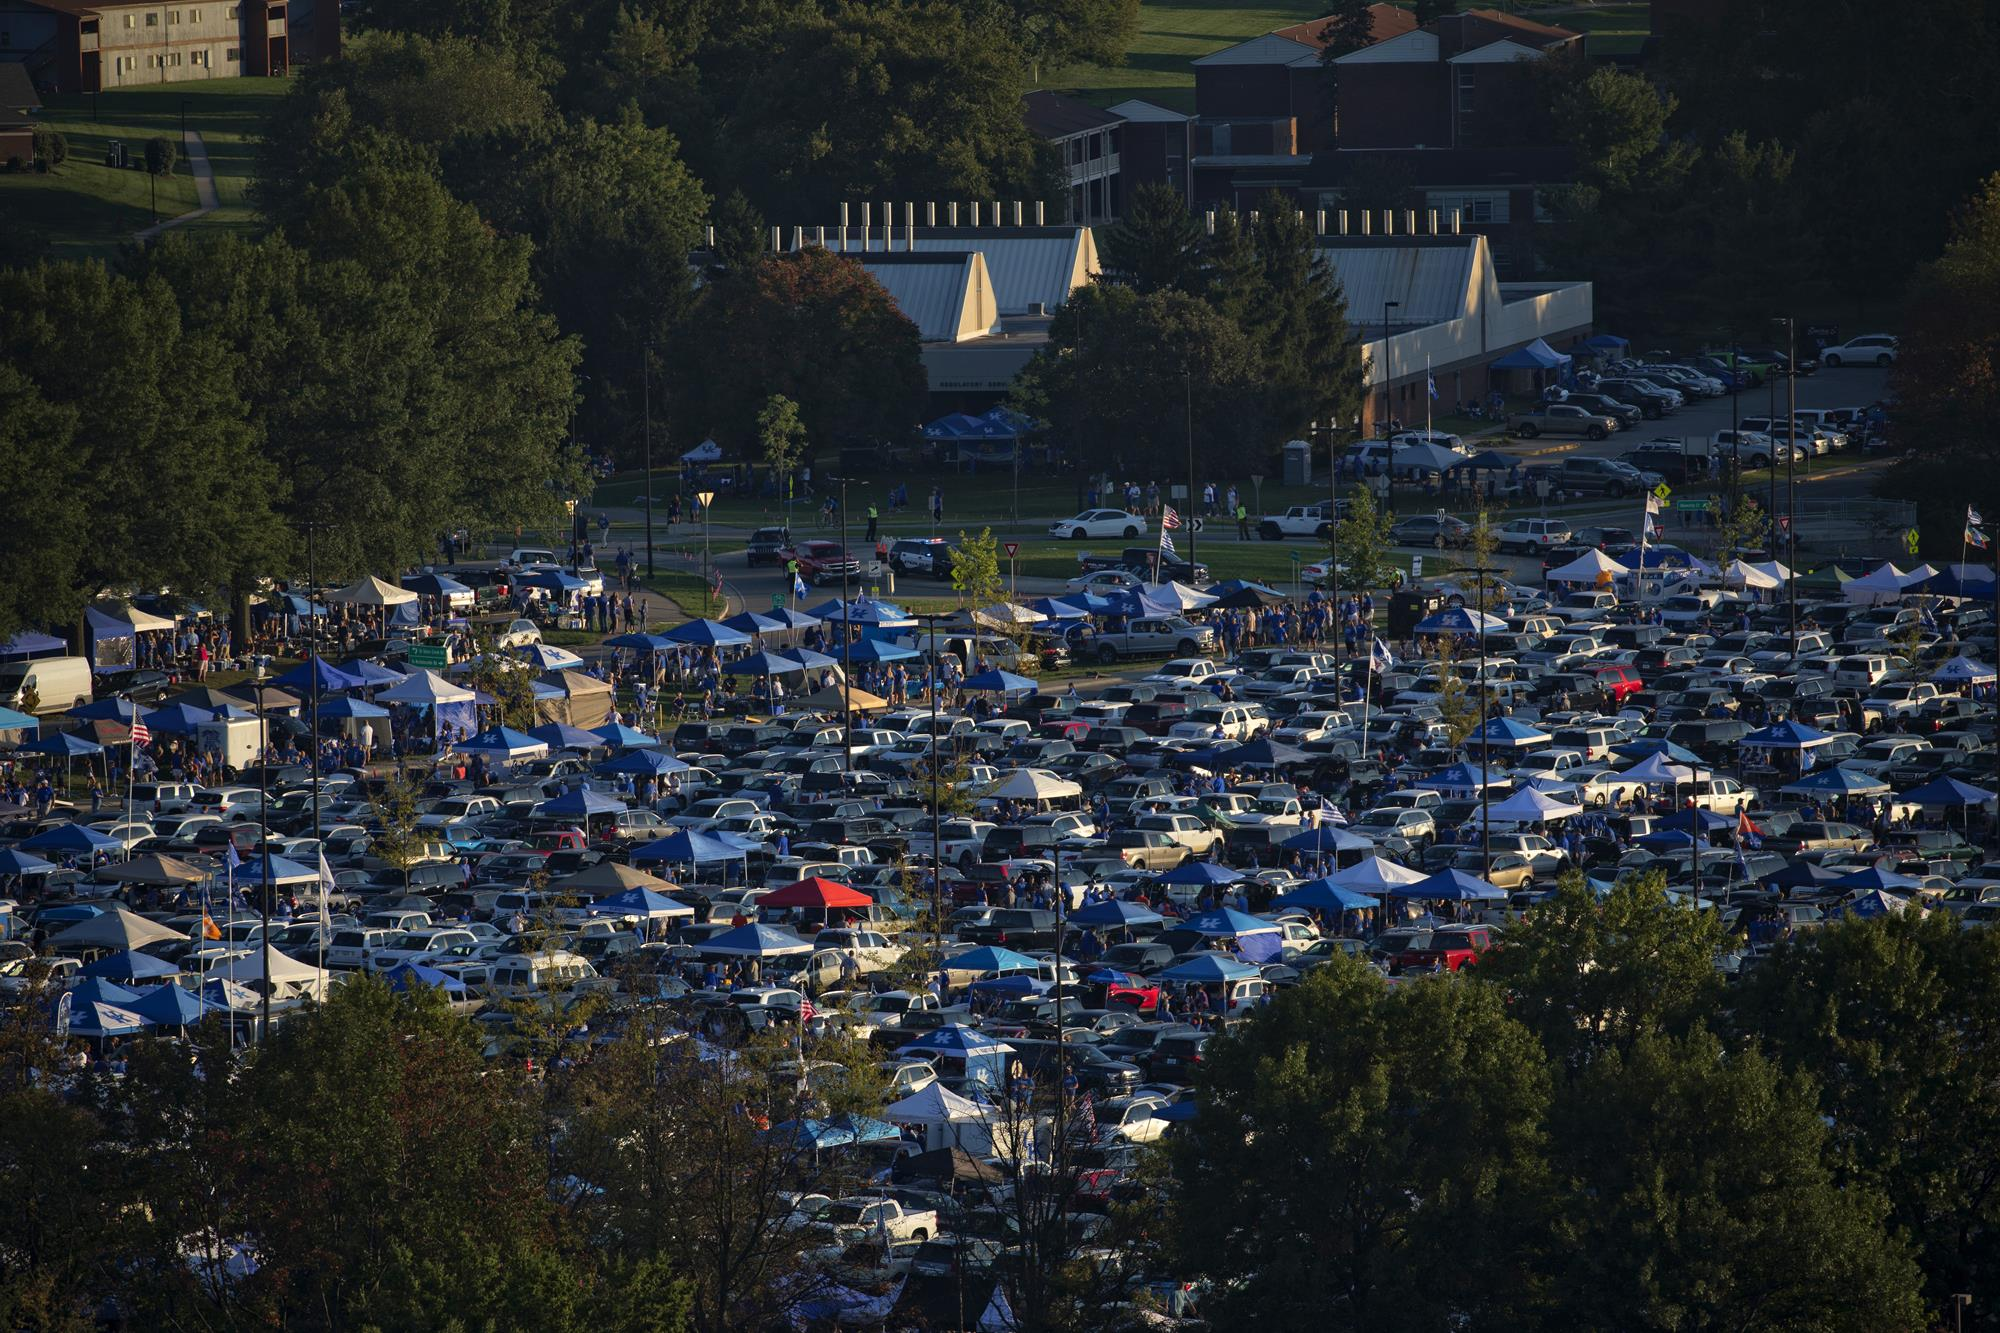 UK, Tailgate Guys Offering Tailgate and Ticket Package